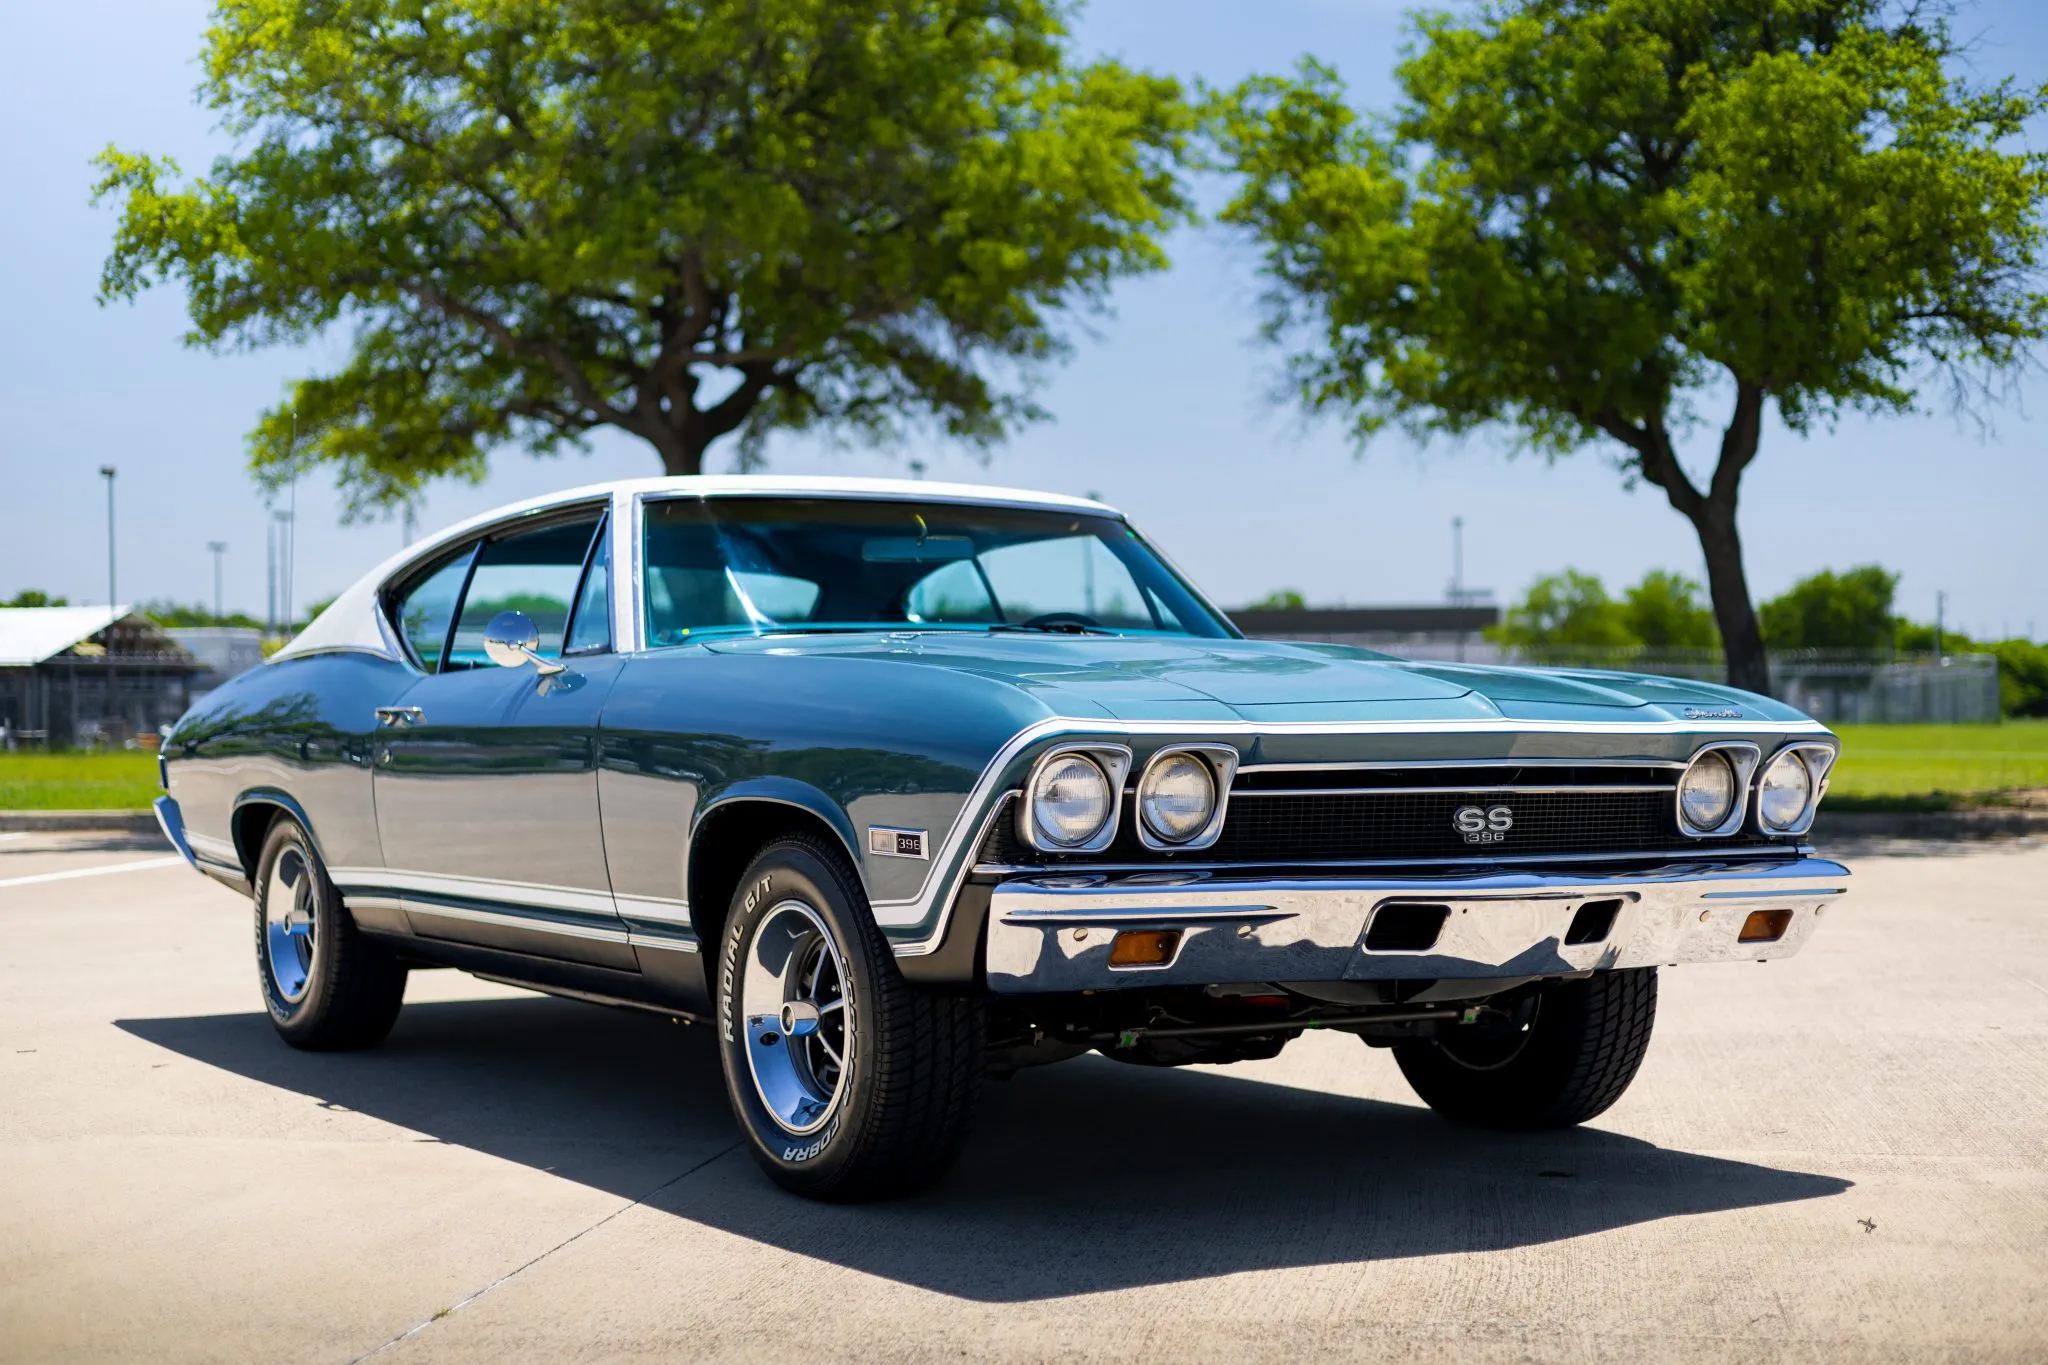 Beyond Boundaries: The Legacy of the 1968 Chevrolet Chevelle SS 396